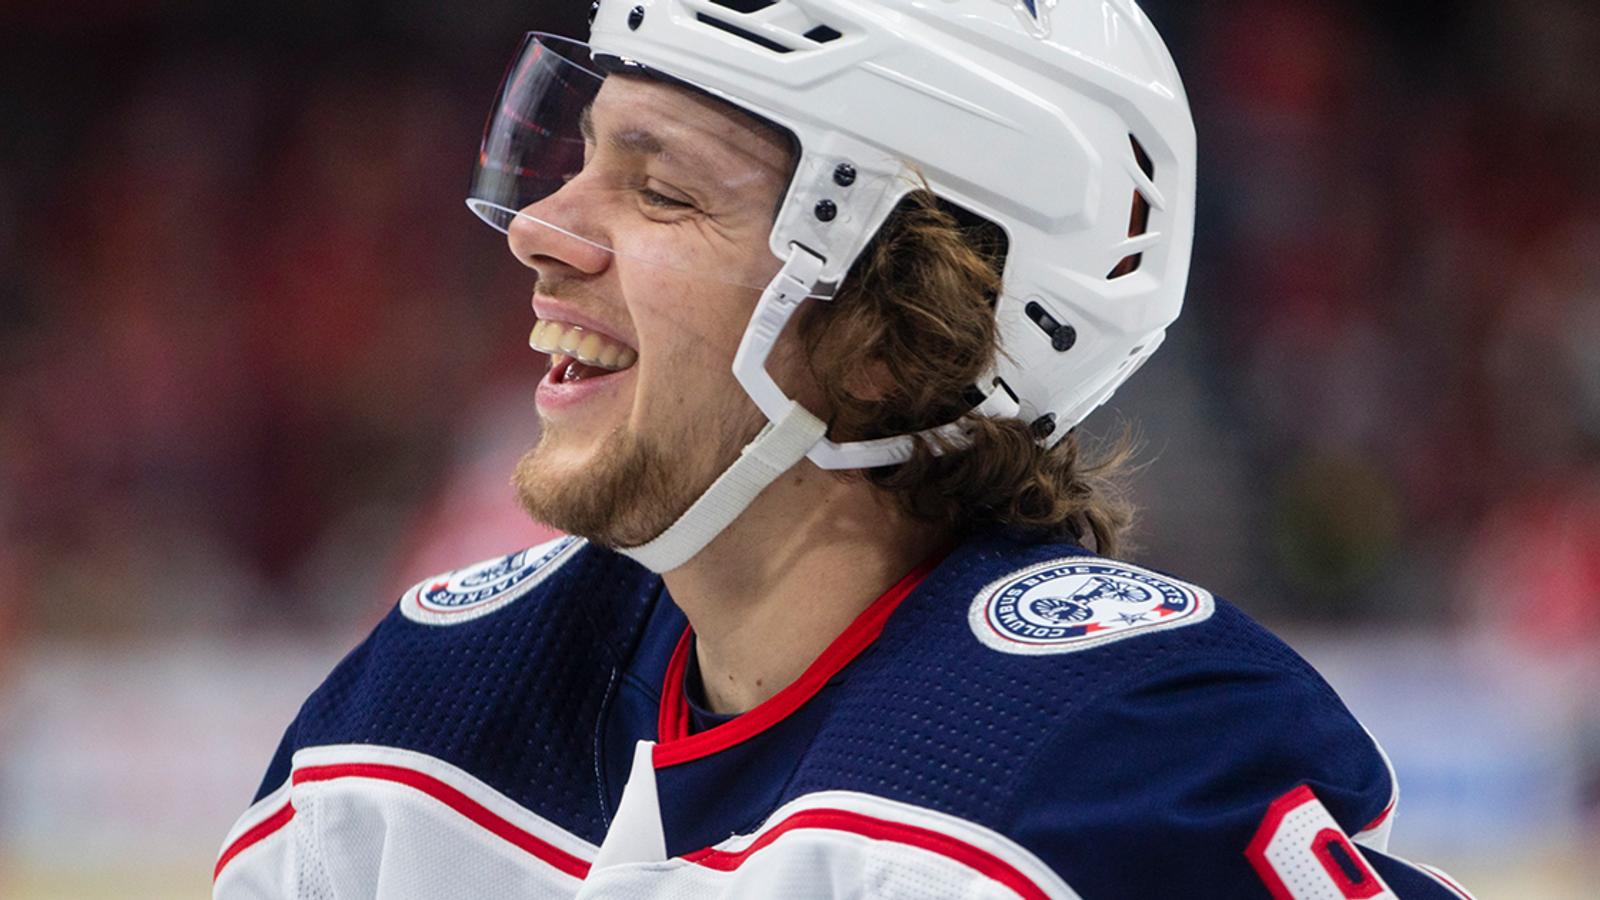 Report: New “stealth” team emerges in Panarin trade talks